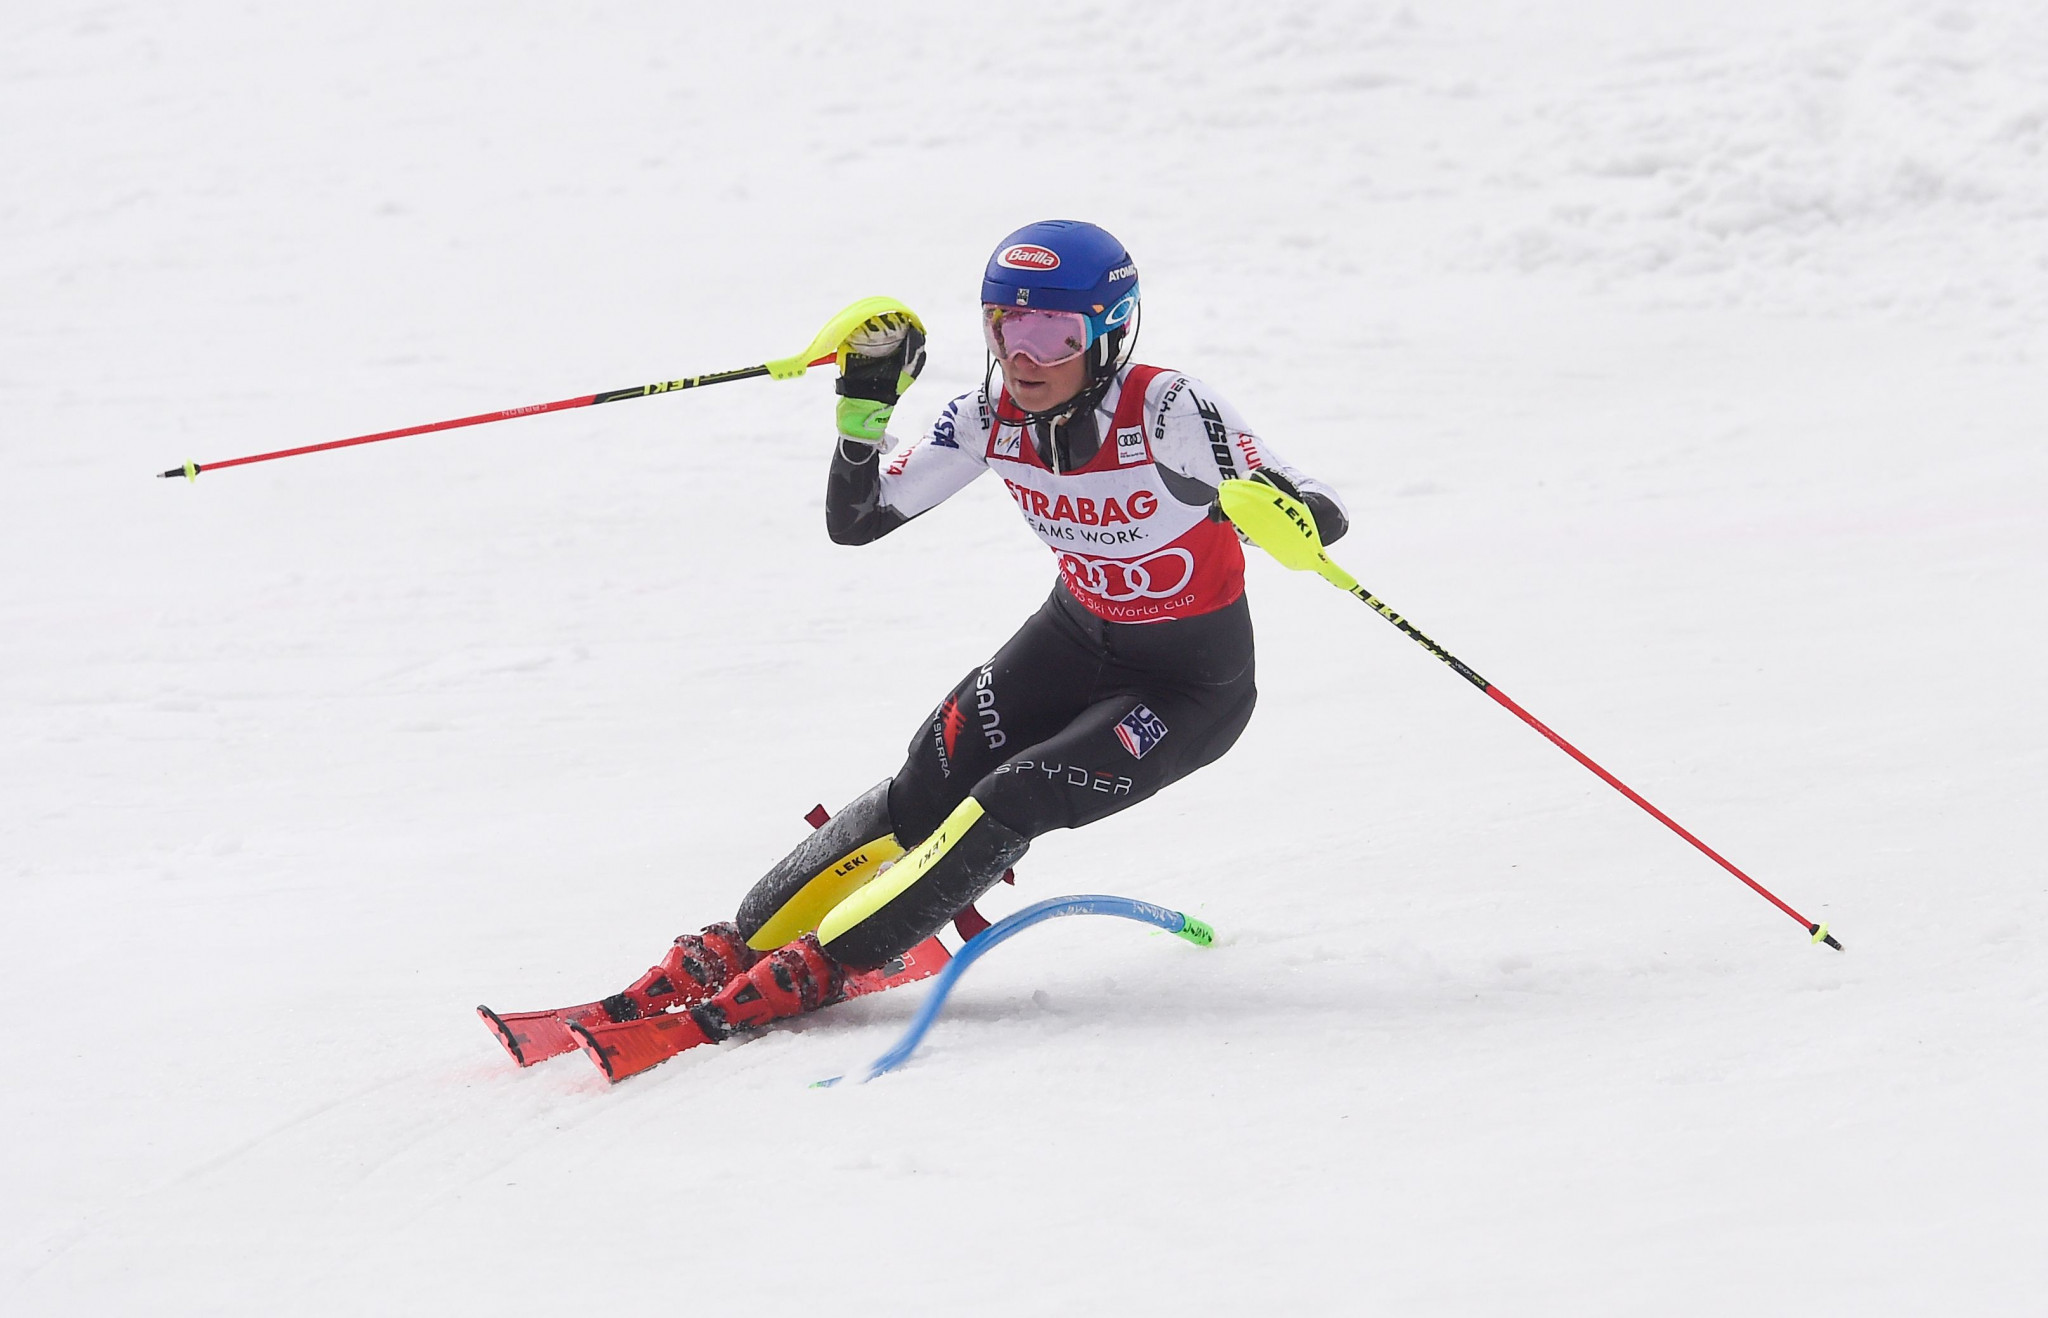 American star Mikaela Shiffrin broke the record for most victories in a single season ©Getty Images